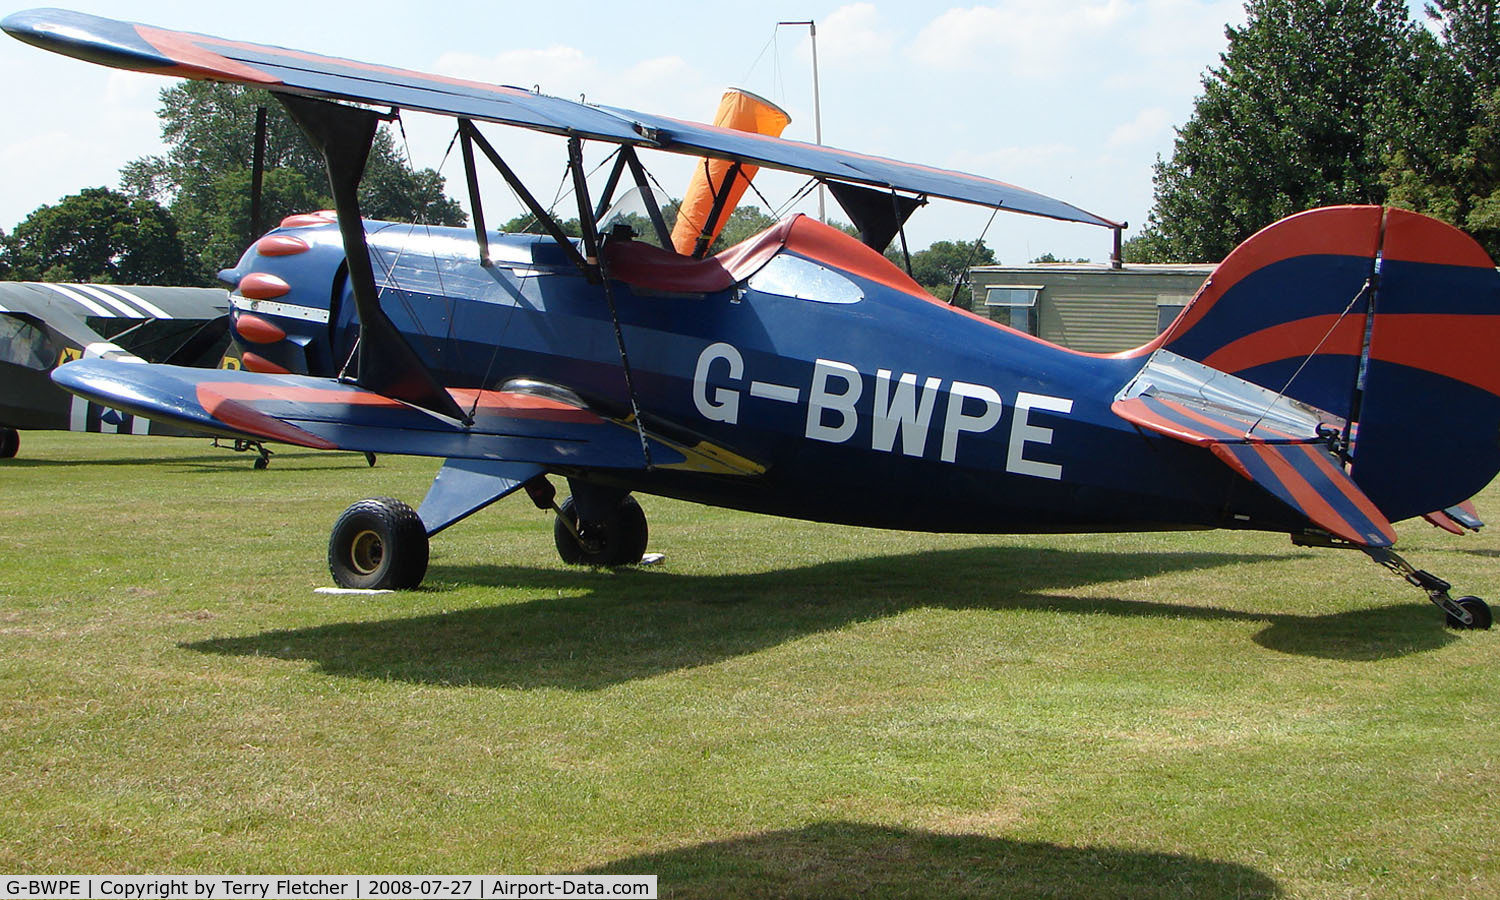 G-BWPE, 1999 Murphy Renegade Spirit 912 C/N PFA 188-12791, Renegade 912 - a visitor to Baxterley Wings and Wheels 2008 , a grass strip in rural Warwickshire in the UK